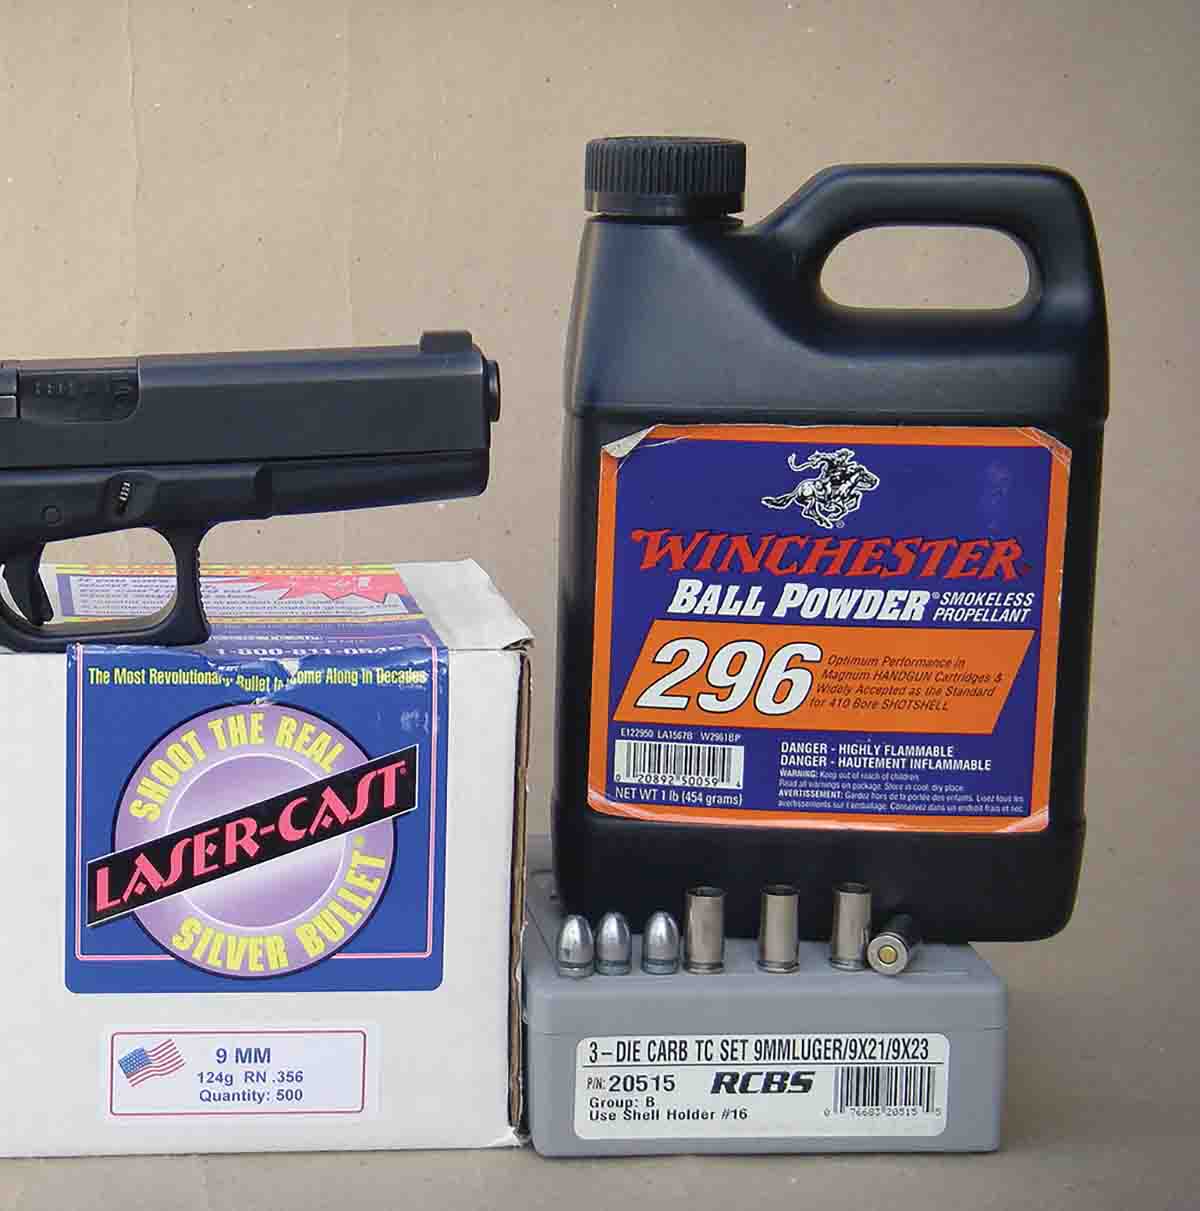 Winchester 296 powder is a top choice for magnum revolvers, but there are better choices for 9mm Luger loads.